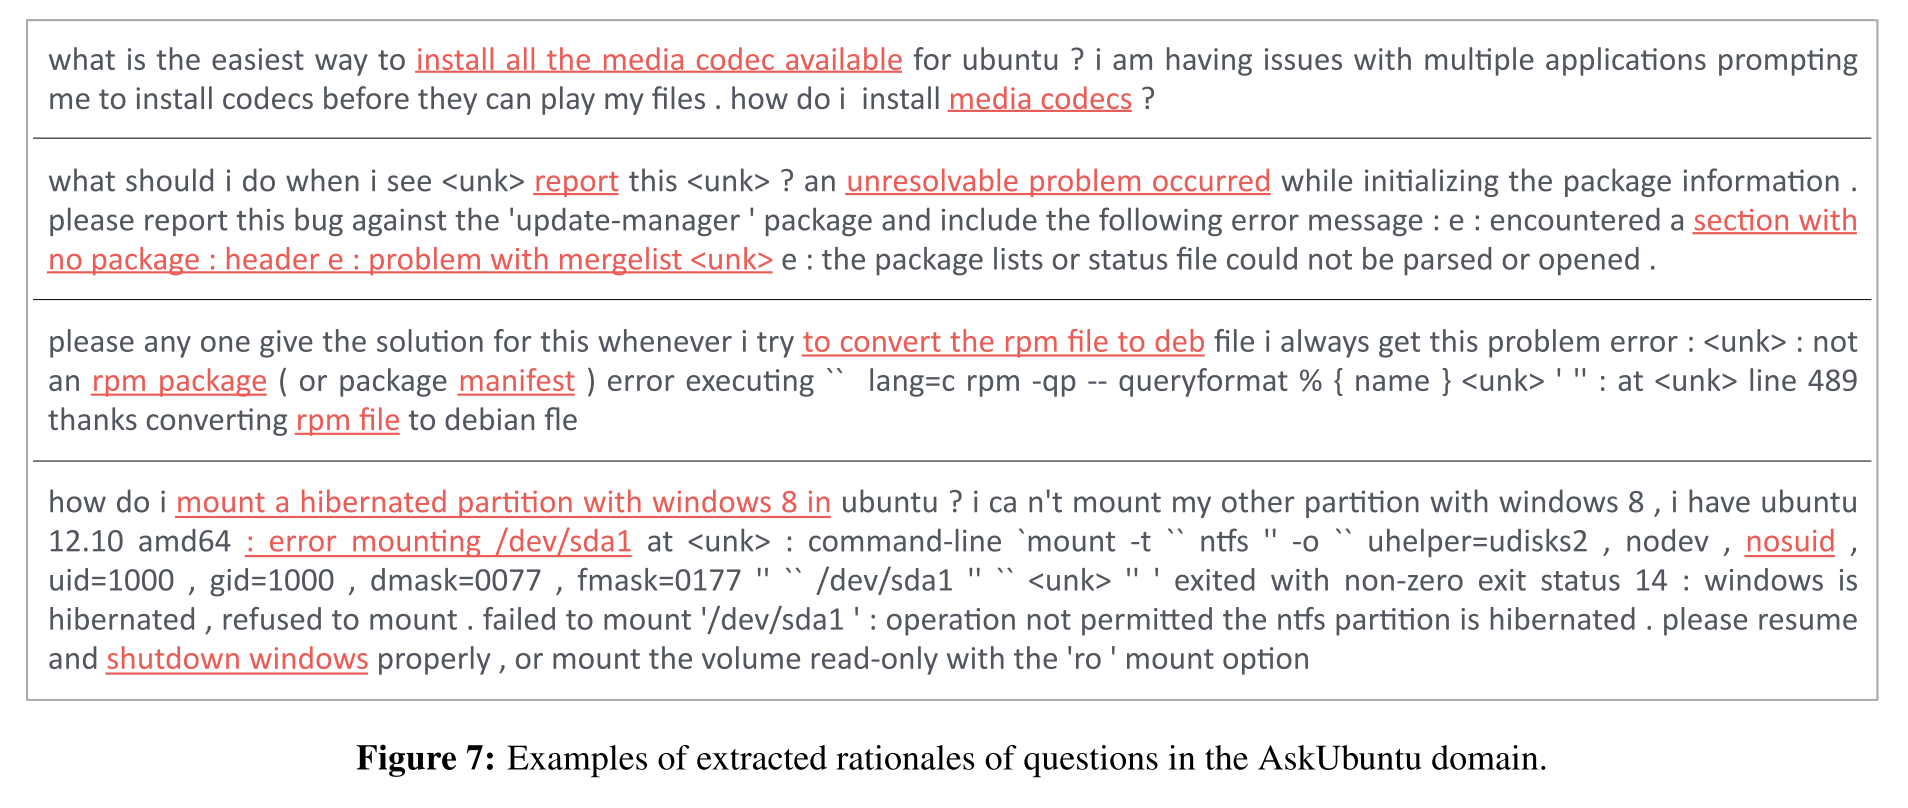 Examples of extracted rationales of questions in the AskUbuntu domain. Source: [2]